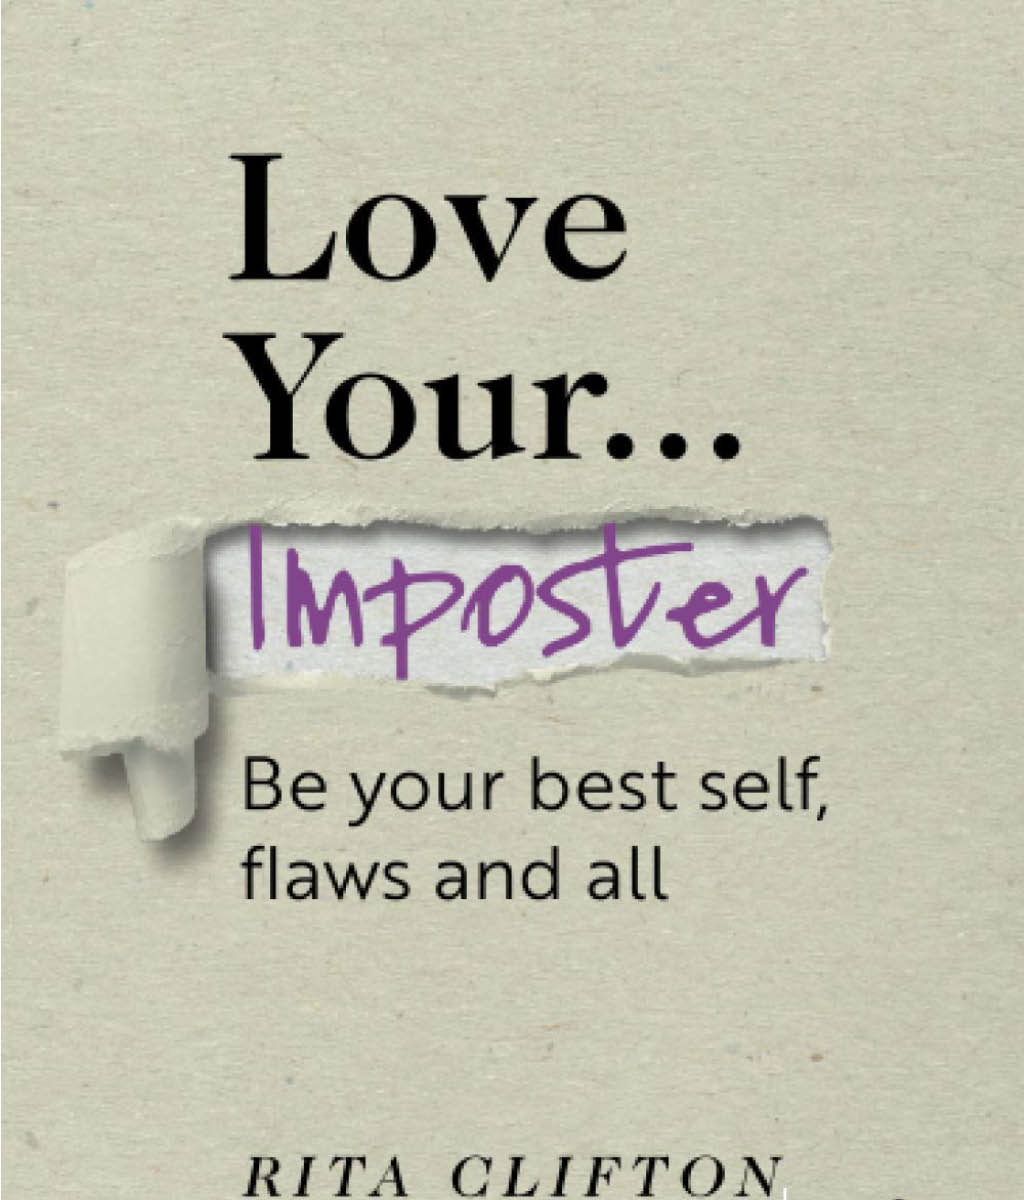 Love Your Imposter by Rita Clifton